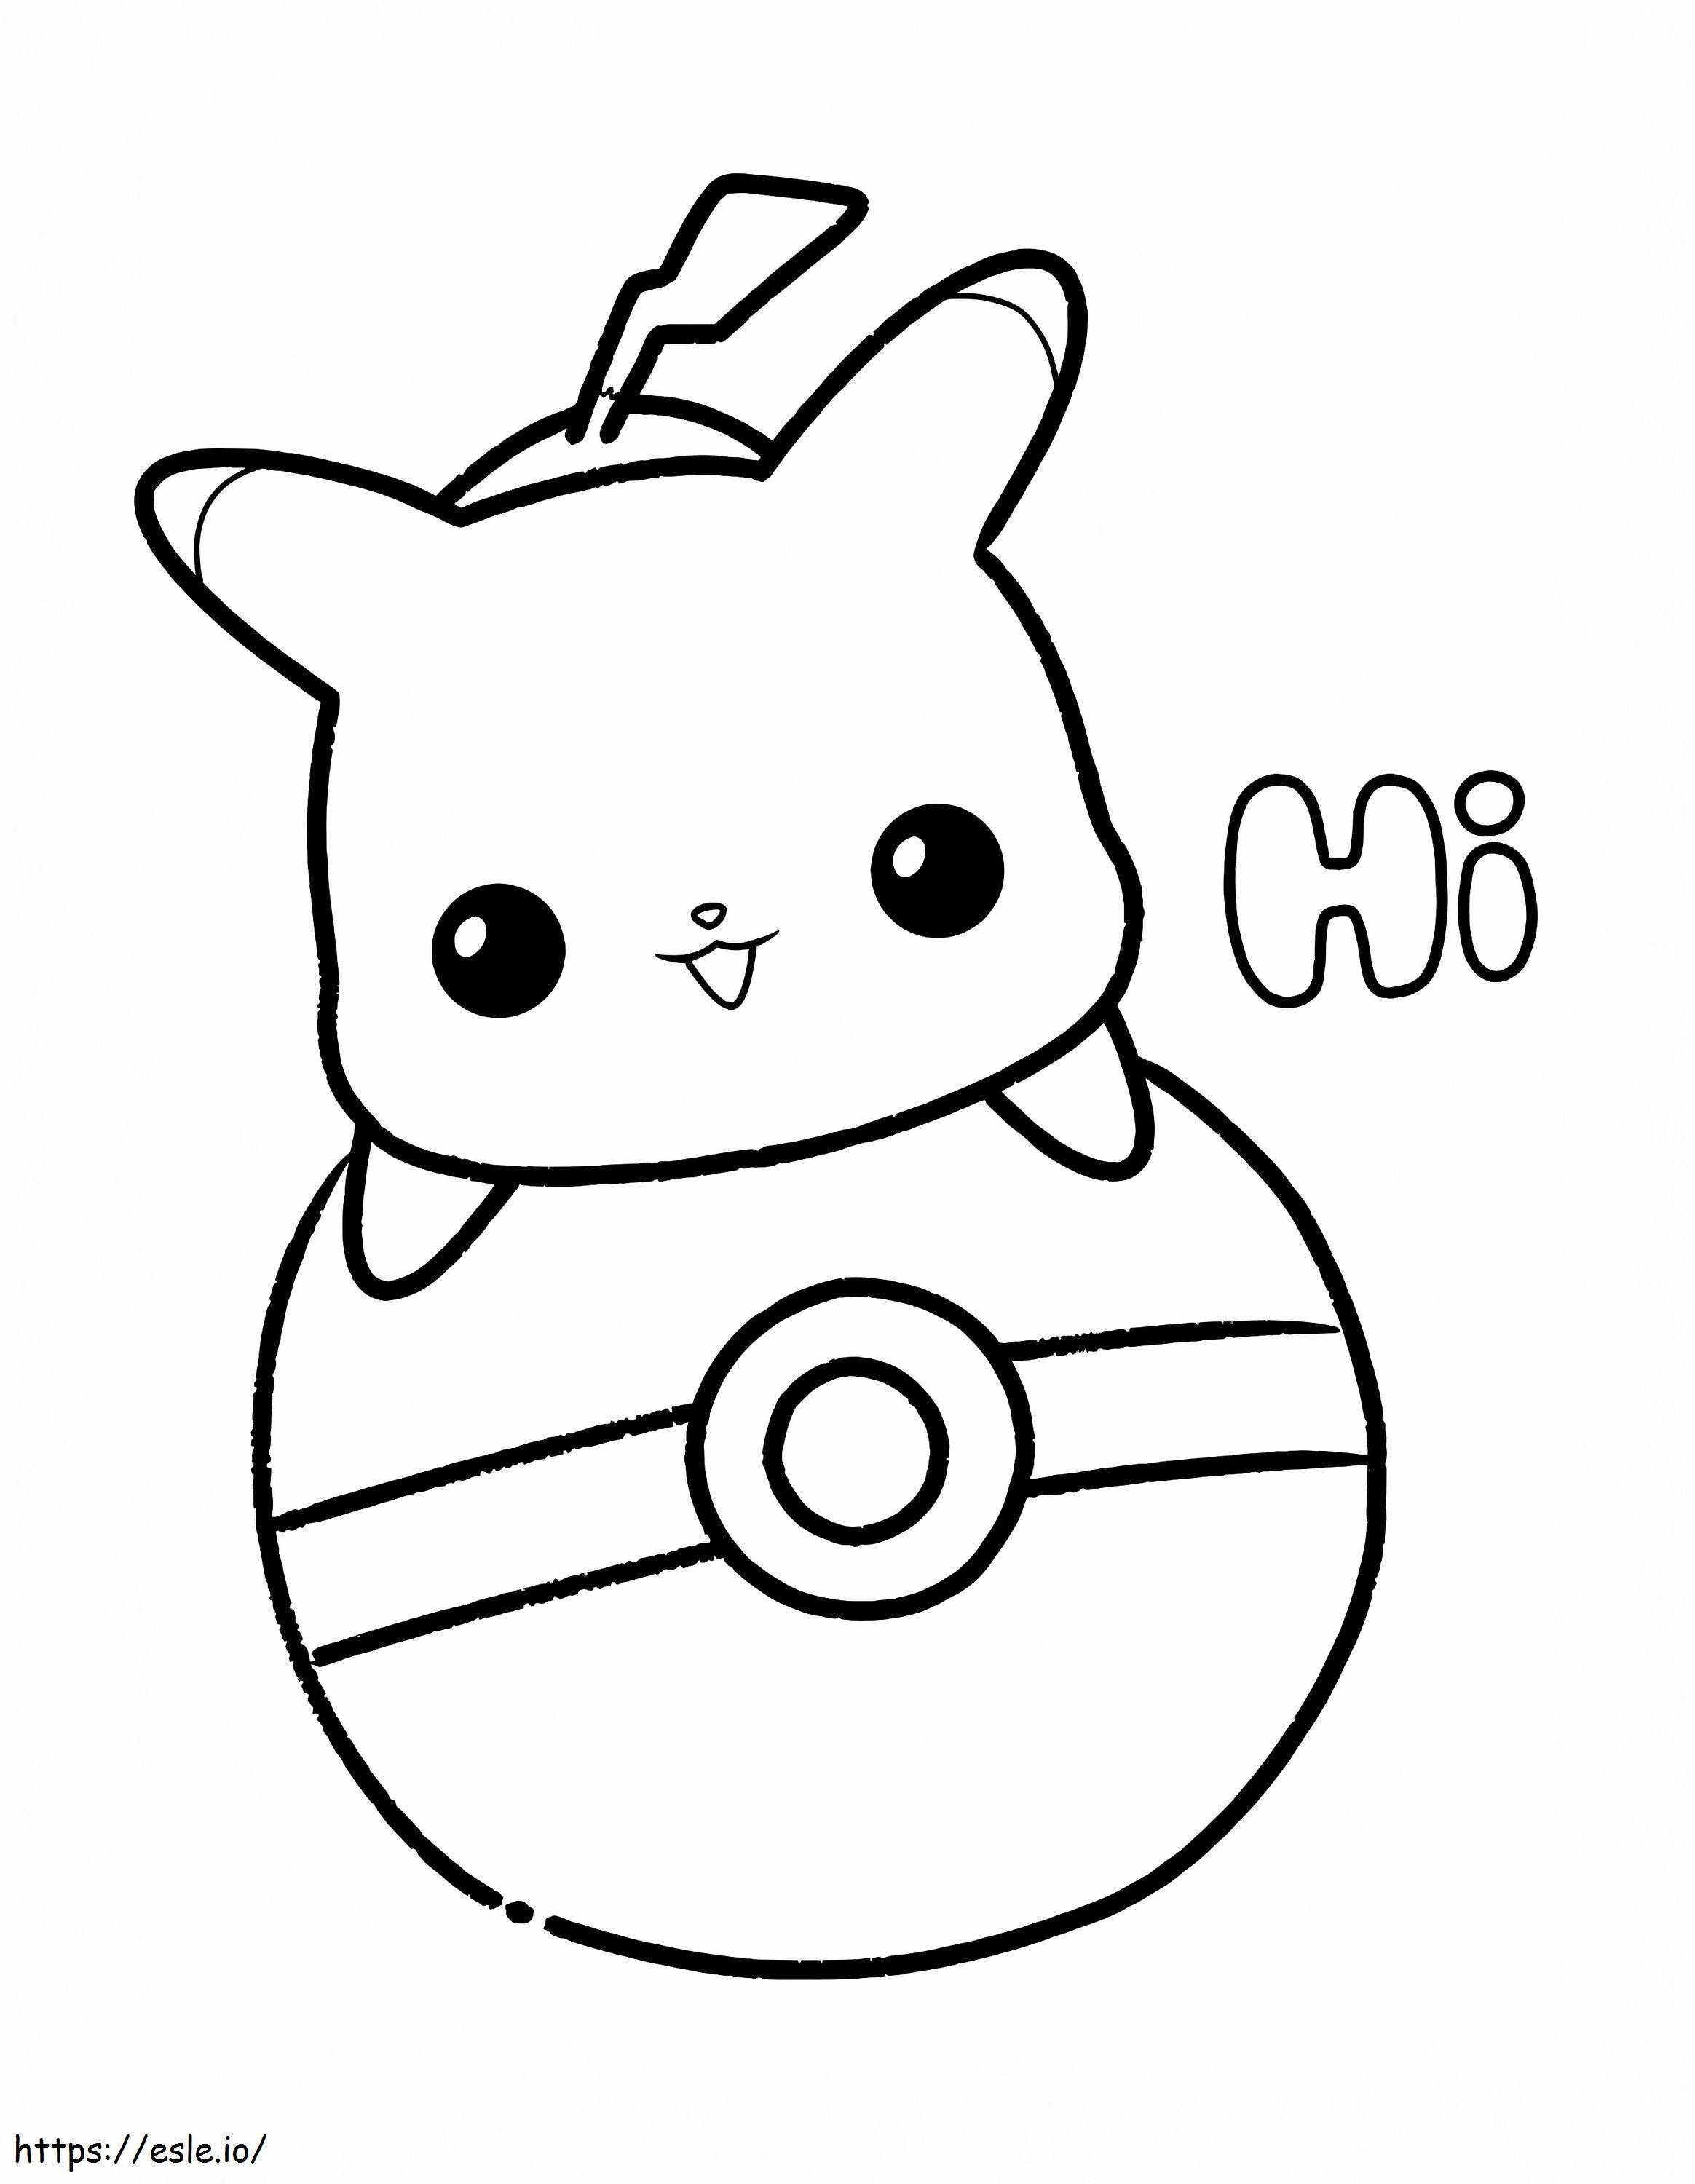 Tiny Pikachu coloring page